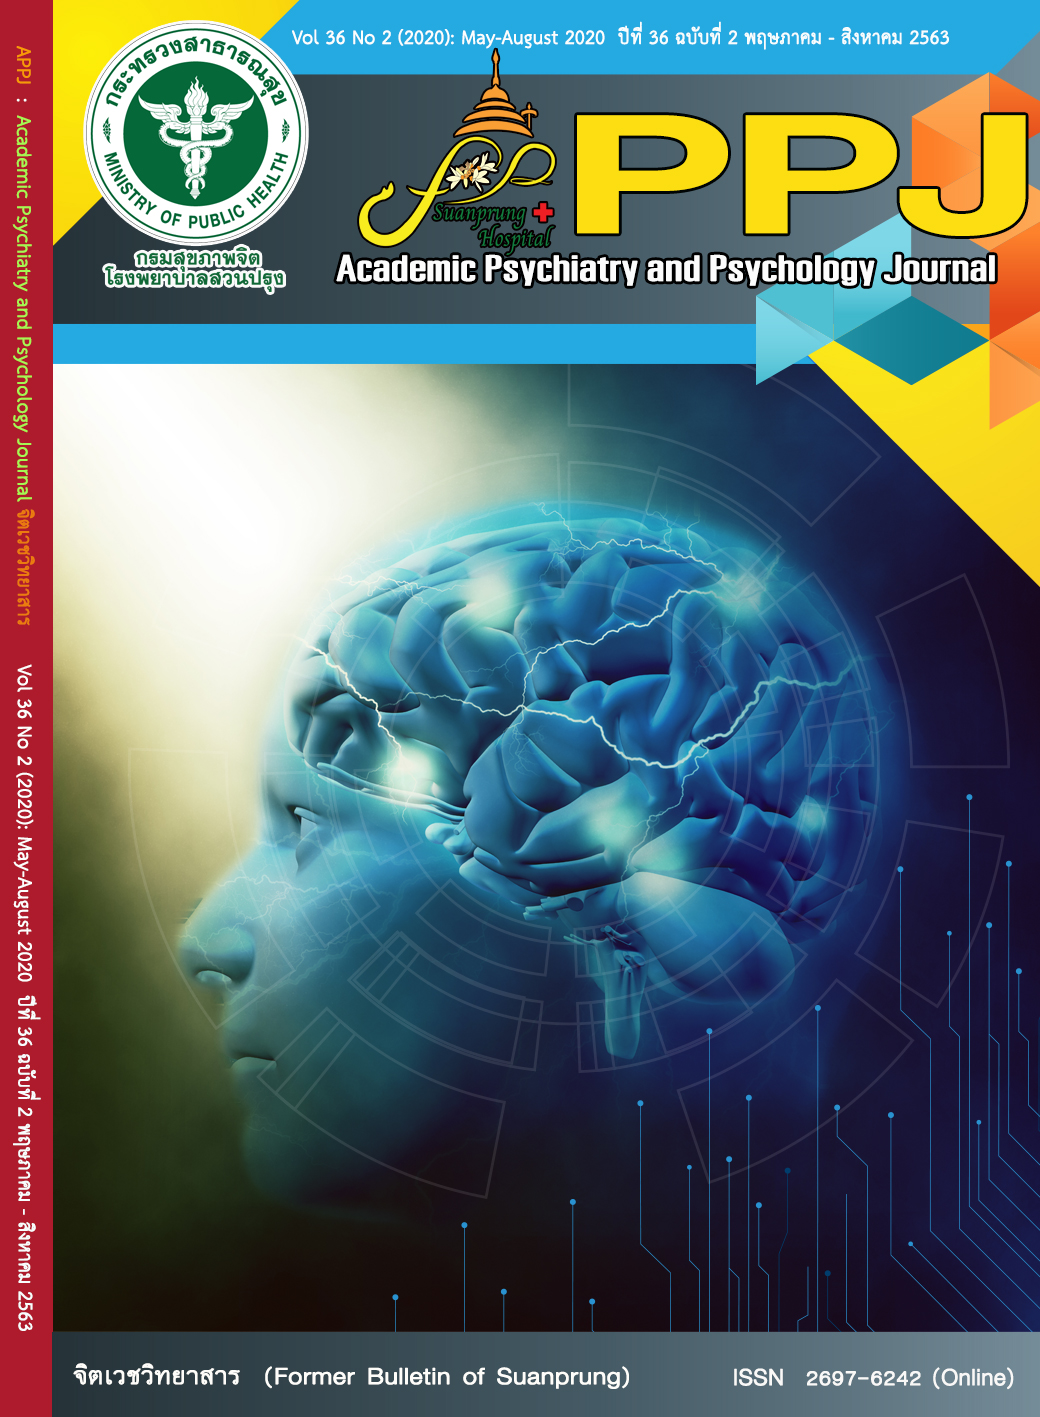 Academic Psychiatry and Psychology Journal